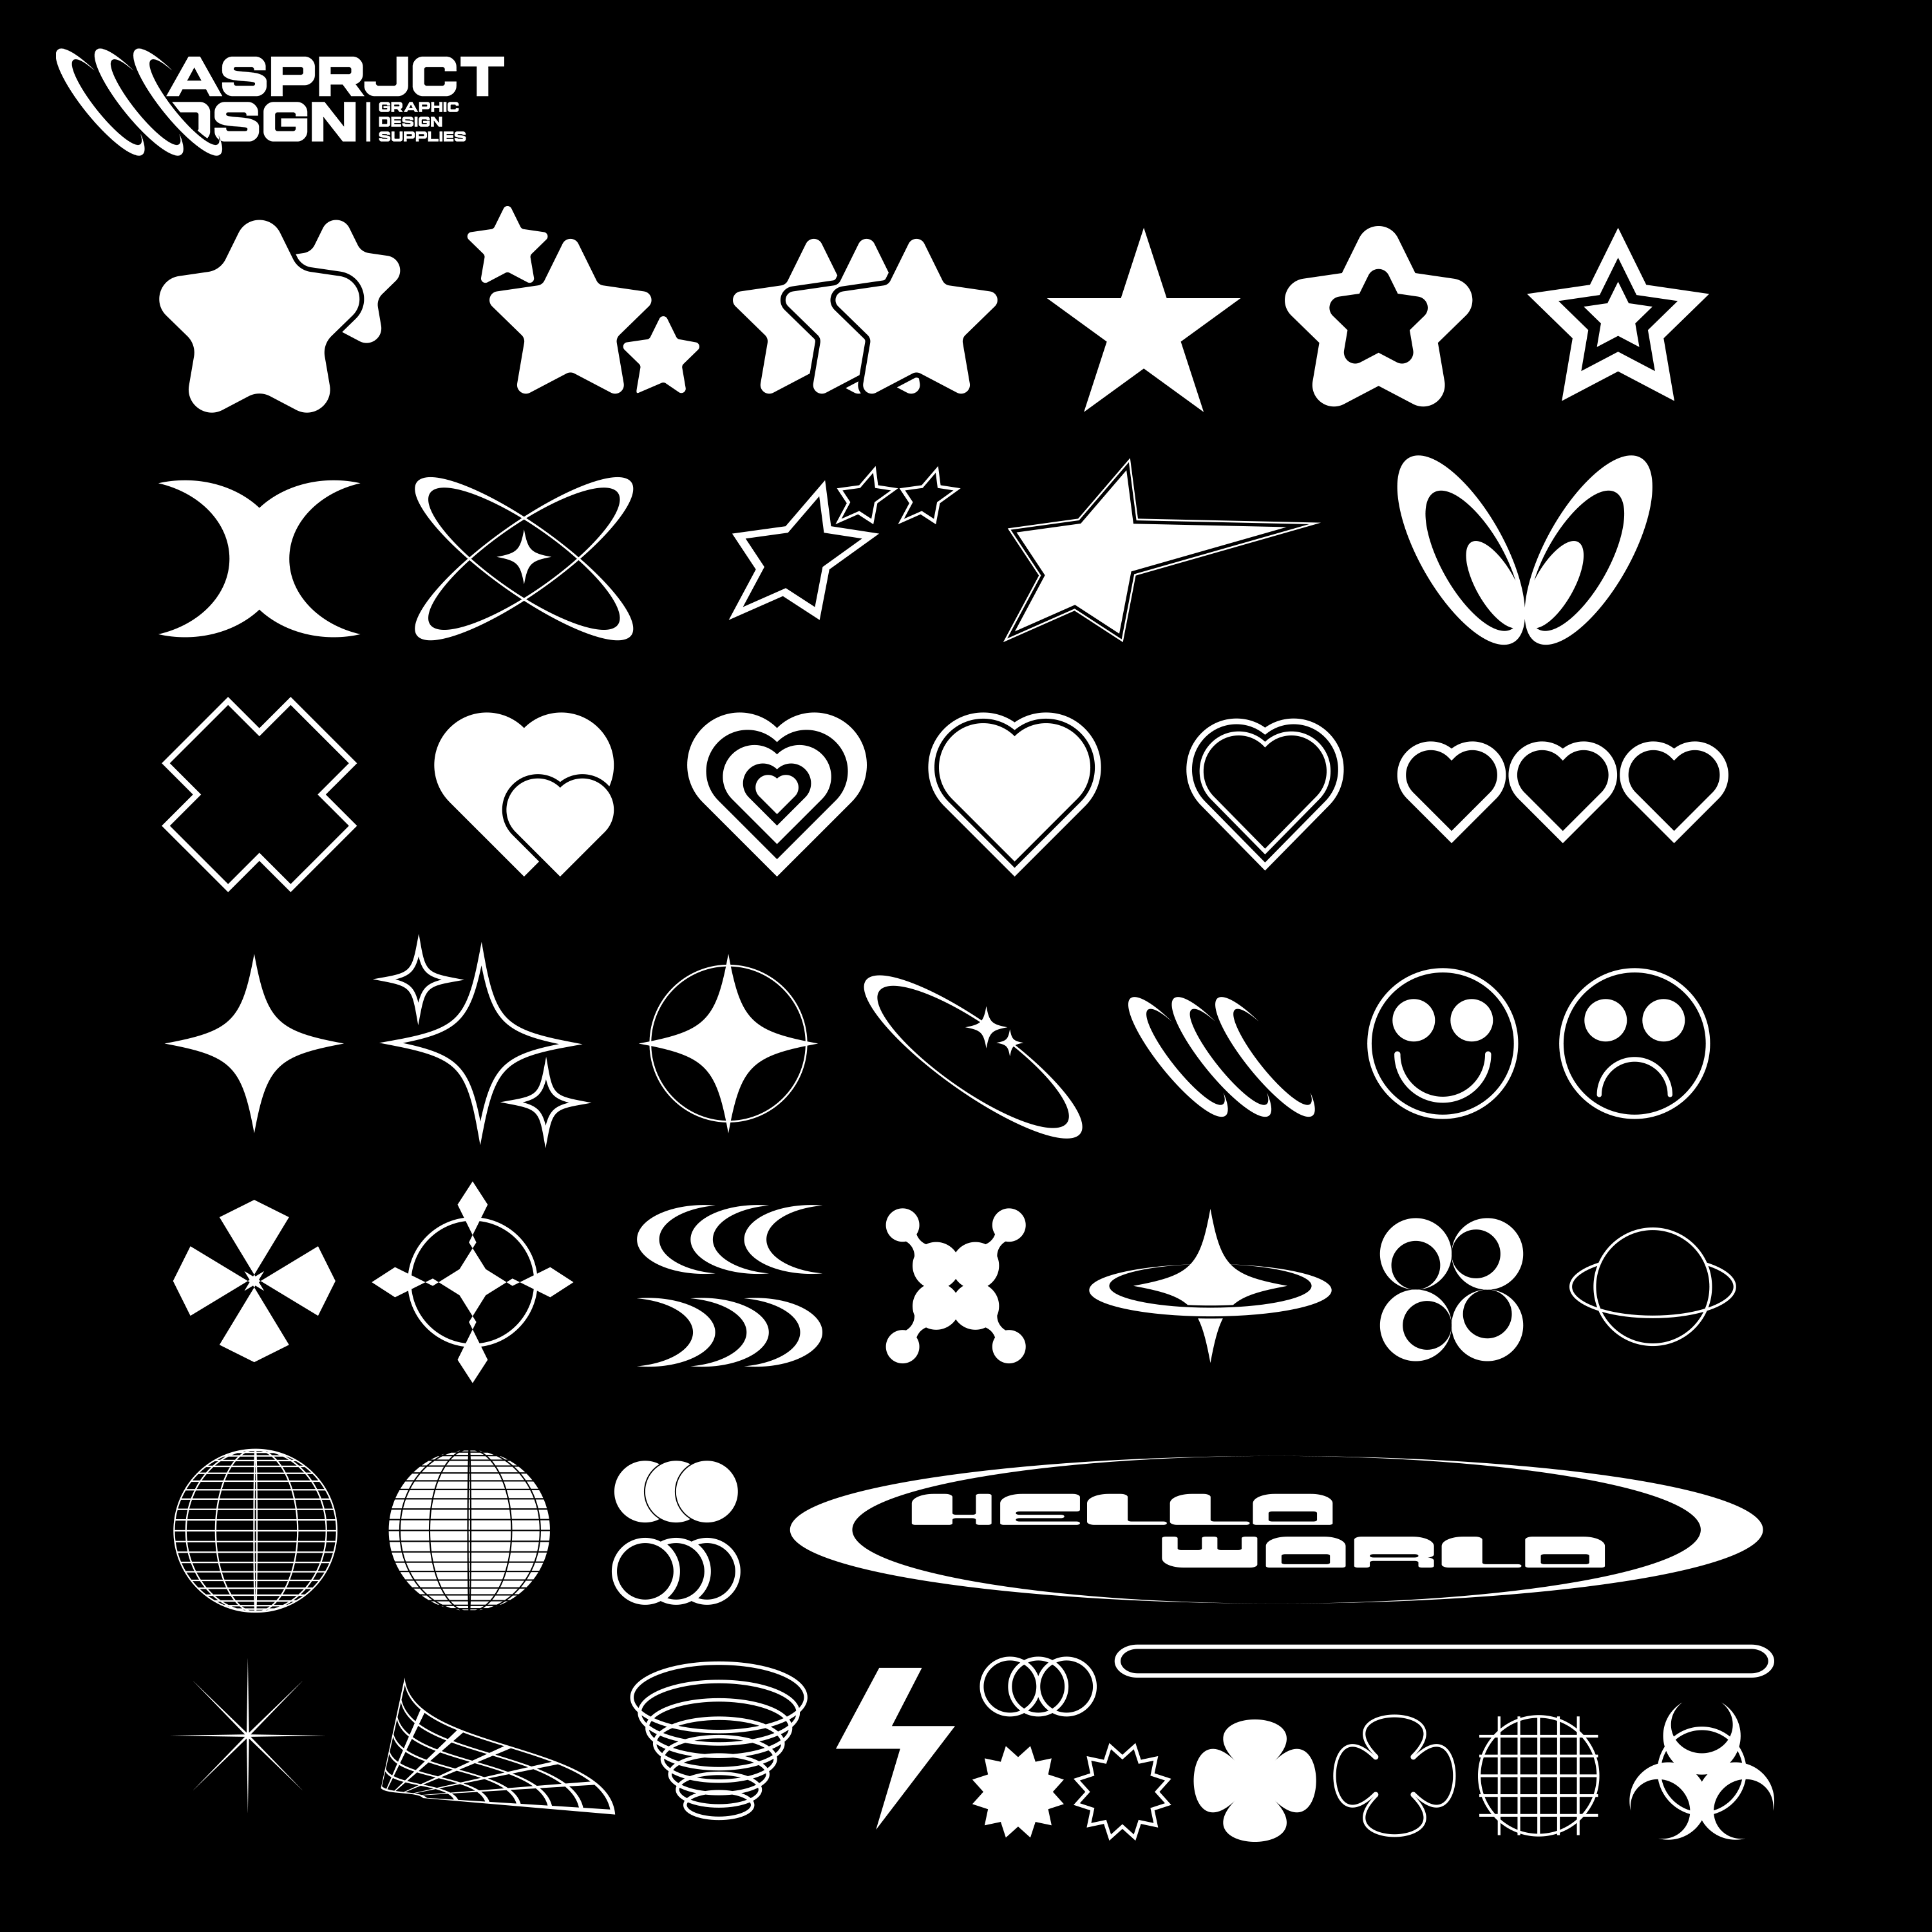 Bunch of different shapes and sizes on a black background.